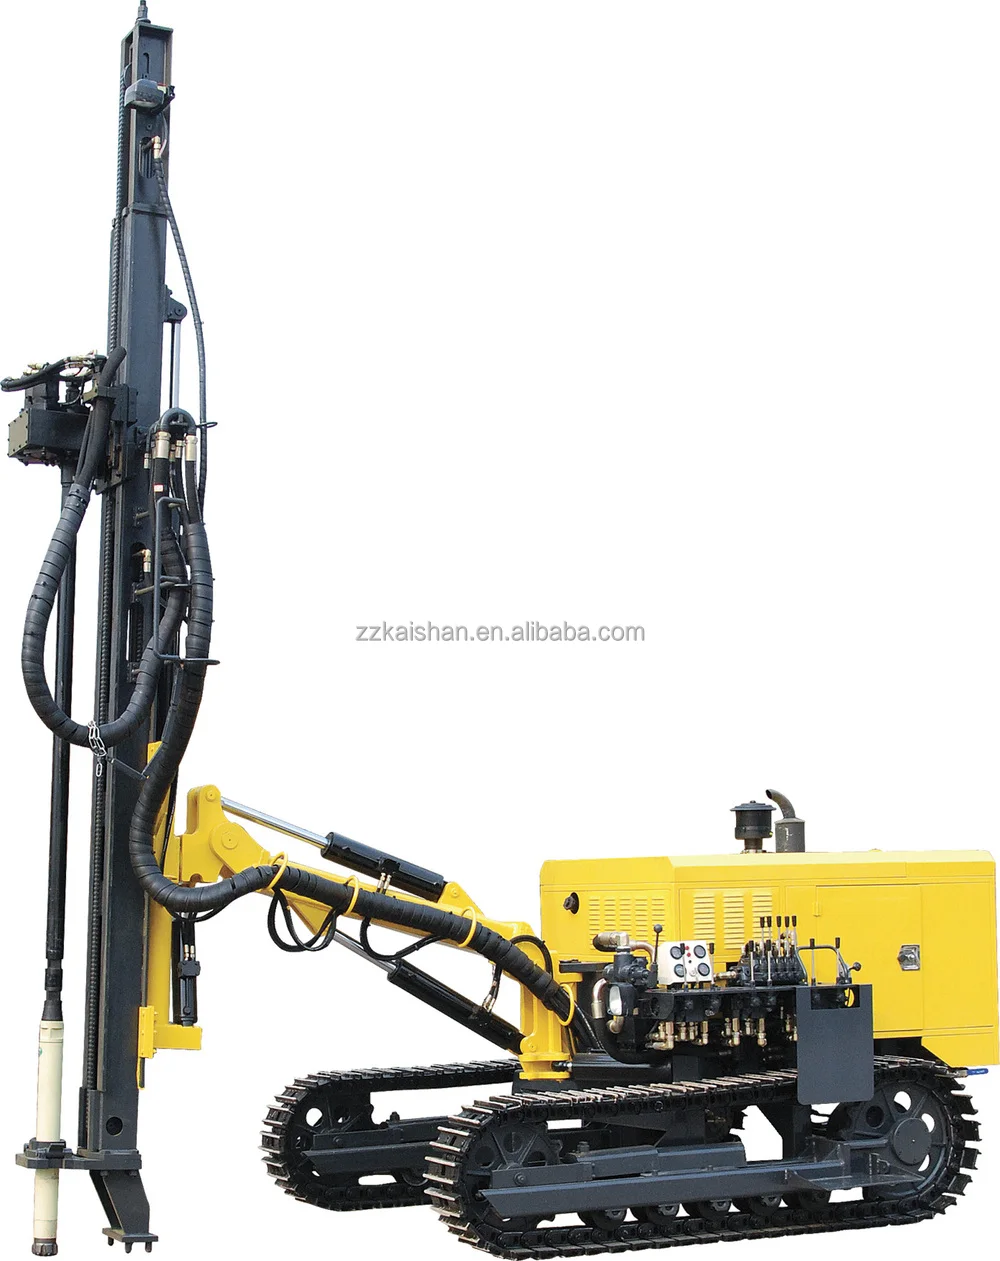 directional drilling machine for sale